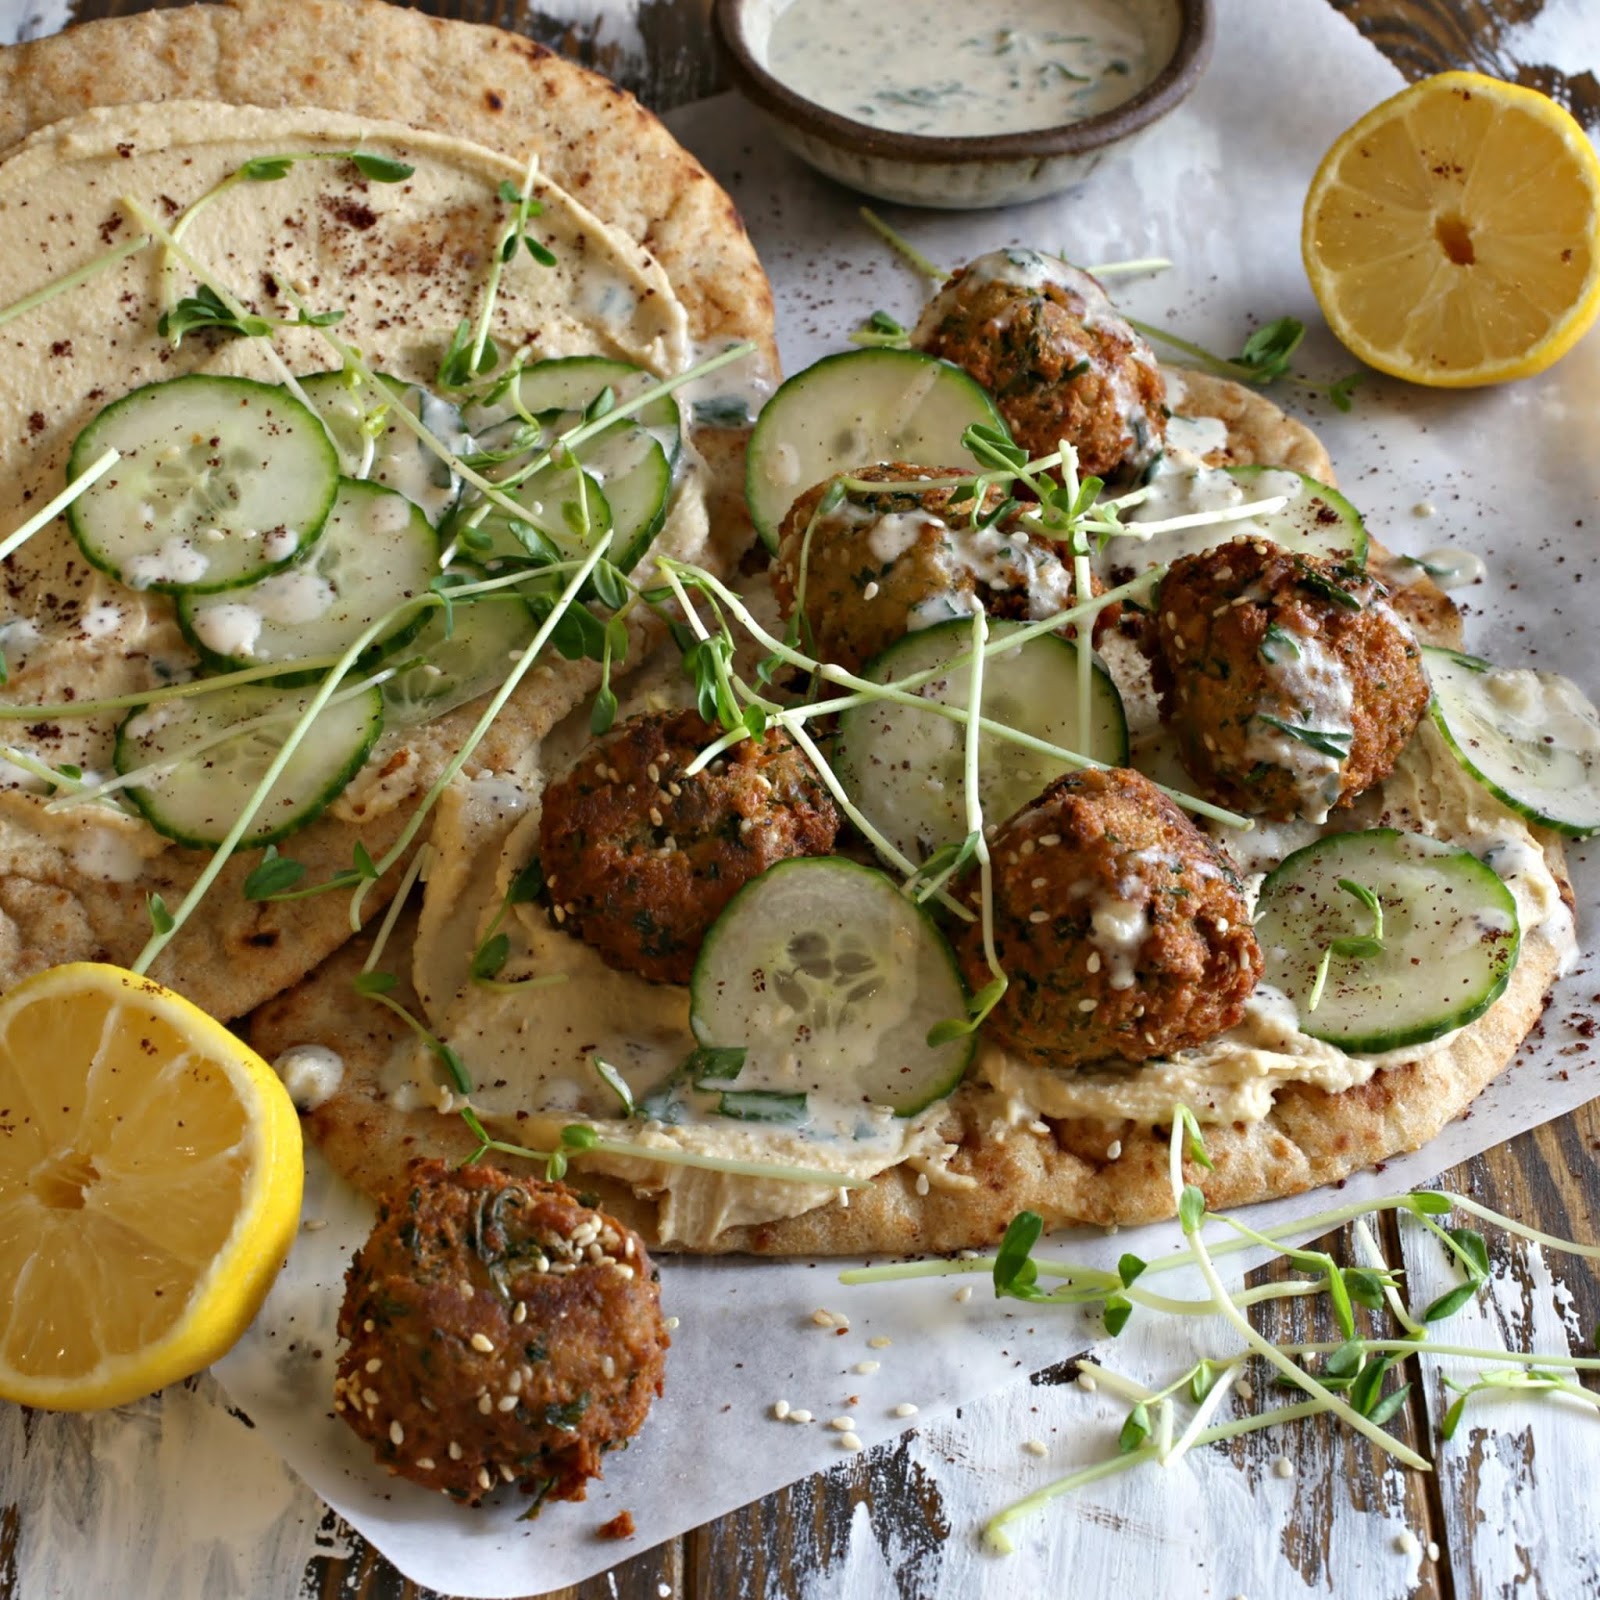 Vegetarian falafel balls made with chickpeas and cauliflower.